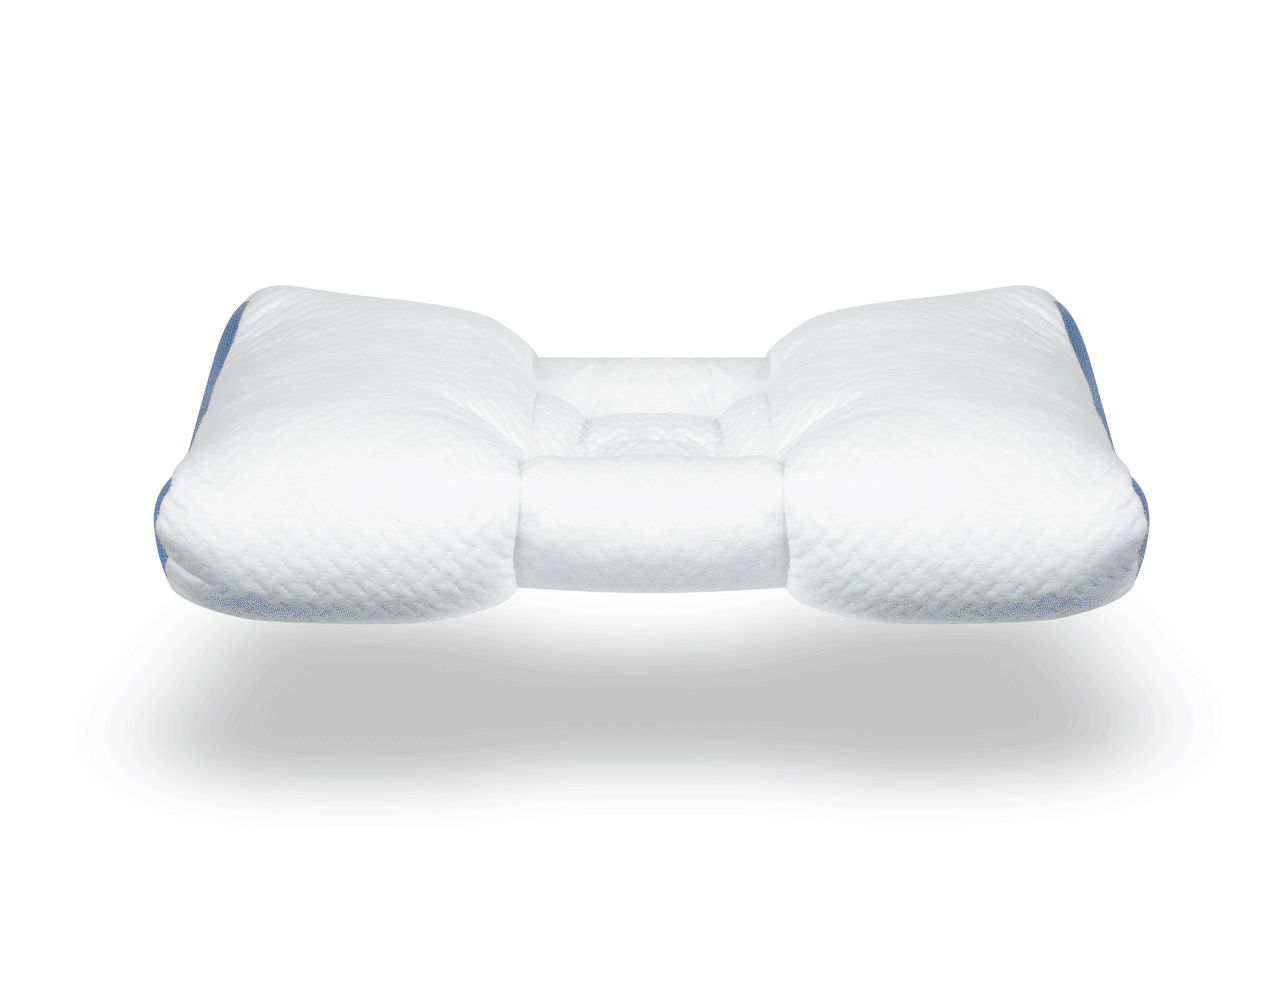 SmoothSpine Alignment Pillow Relieve Pain FREE Extra Pillow Case